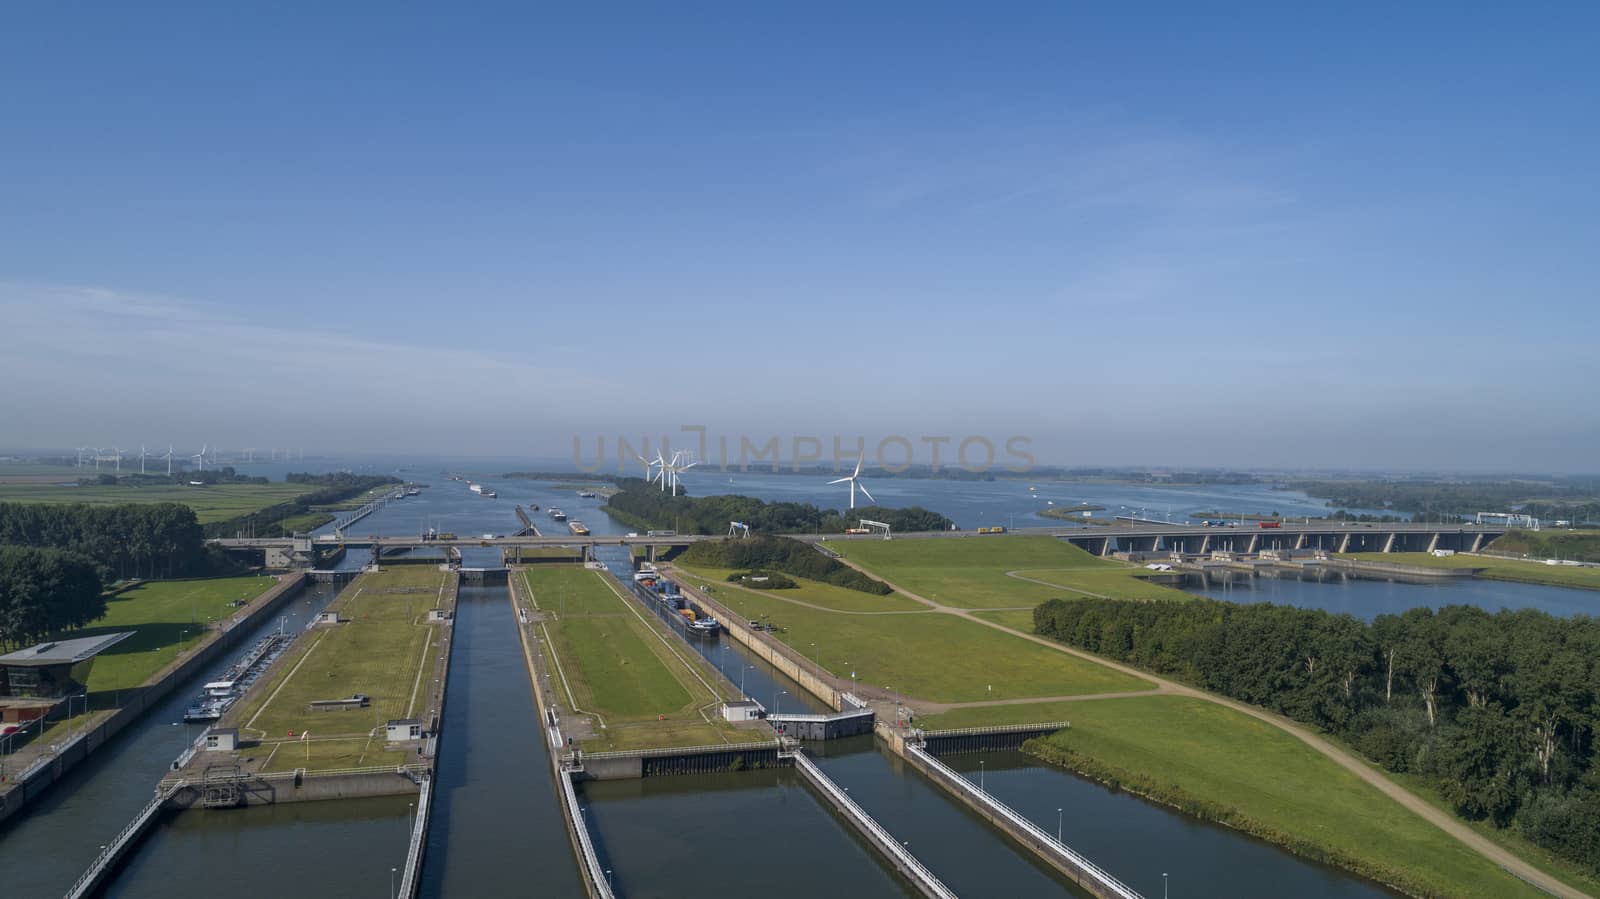 Volkeraksluizen Hollands Diep. Drone photograpy from the delta works in the netherlands in the Netherlands